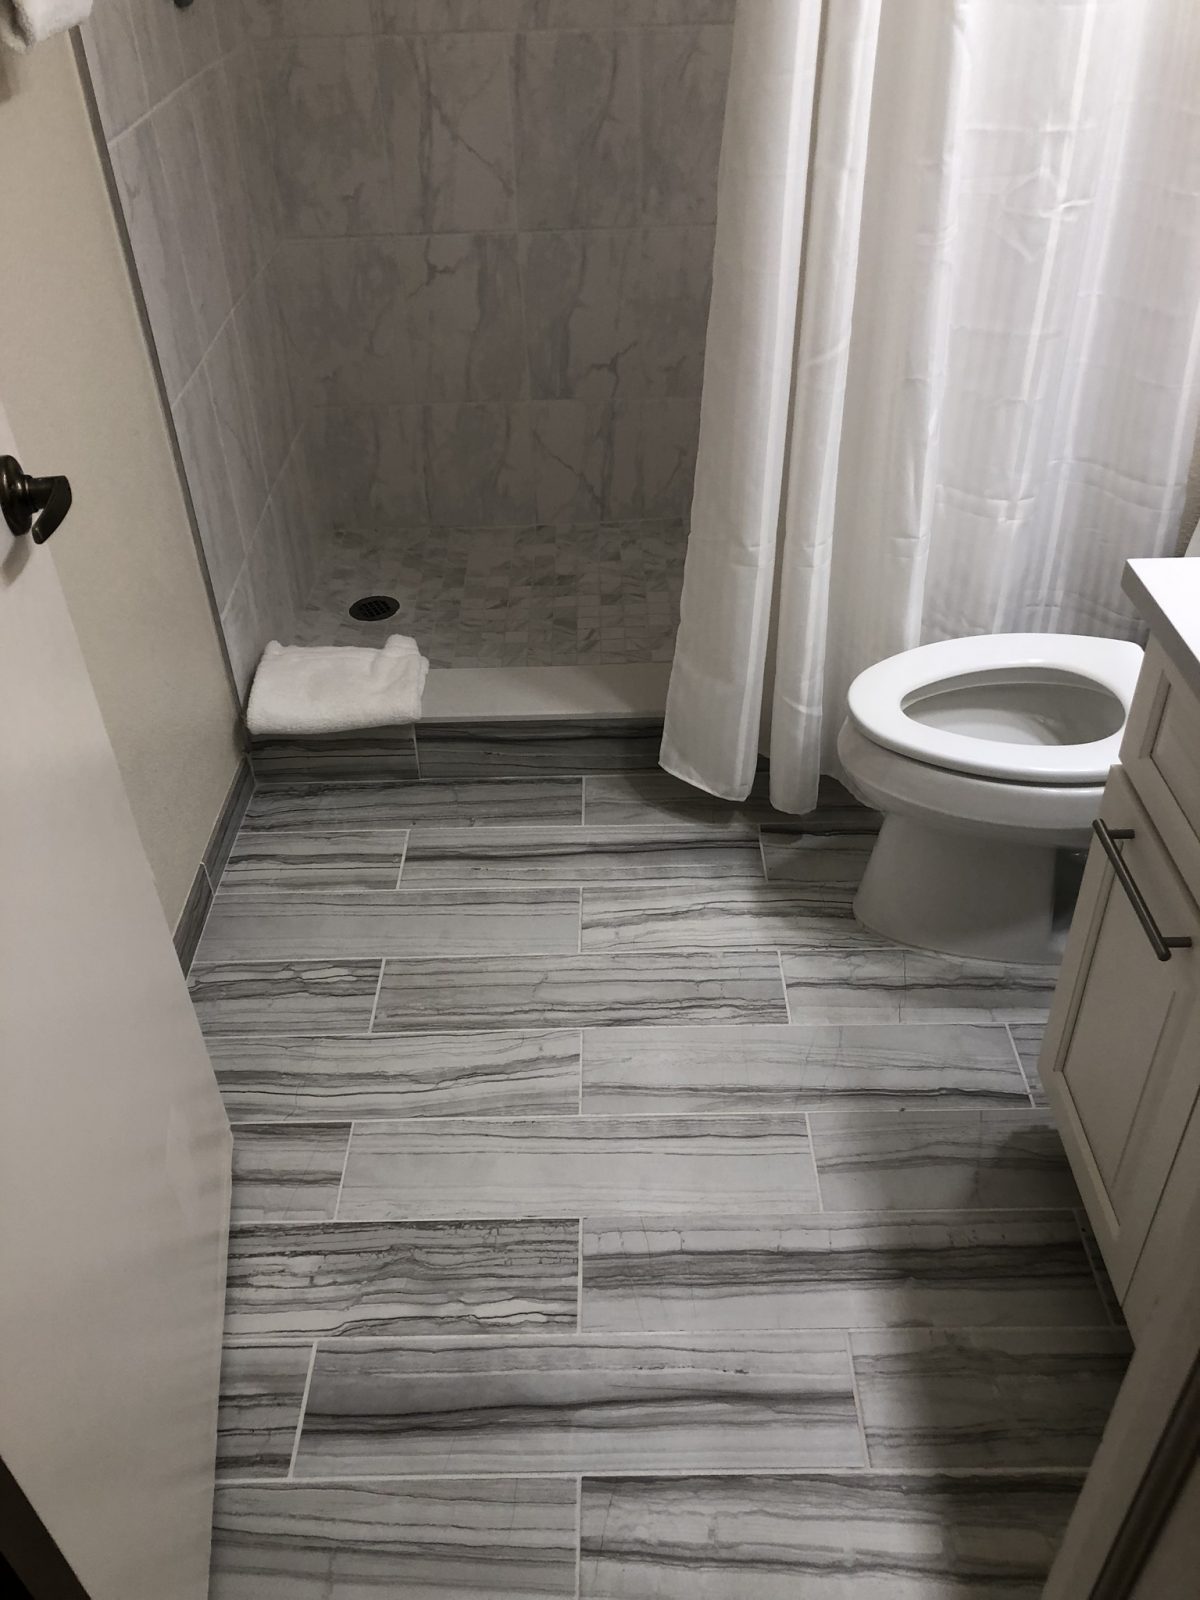 Professional Tile and Grout Cleaning Image Cincinnati Ohio Sample 5